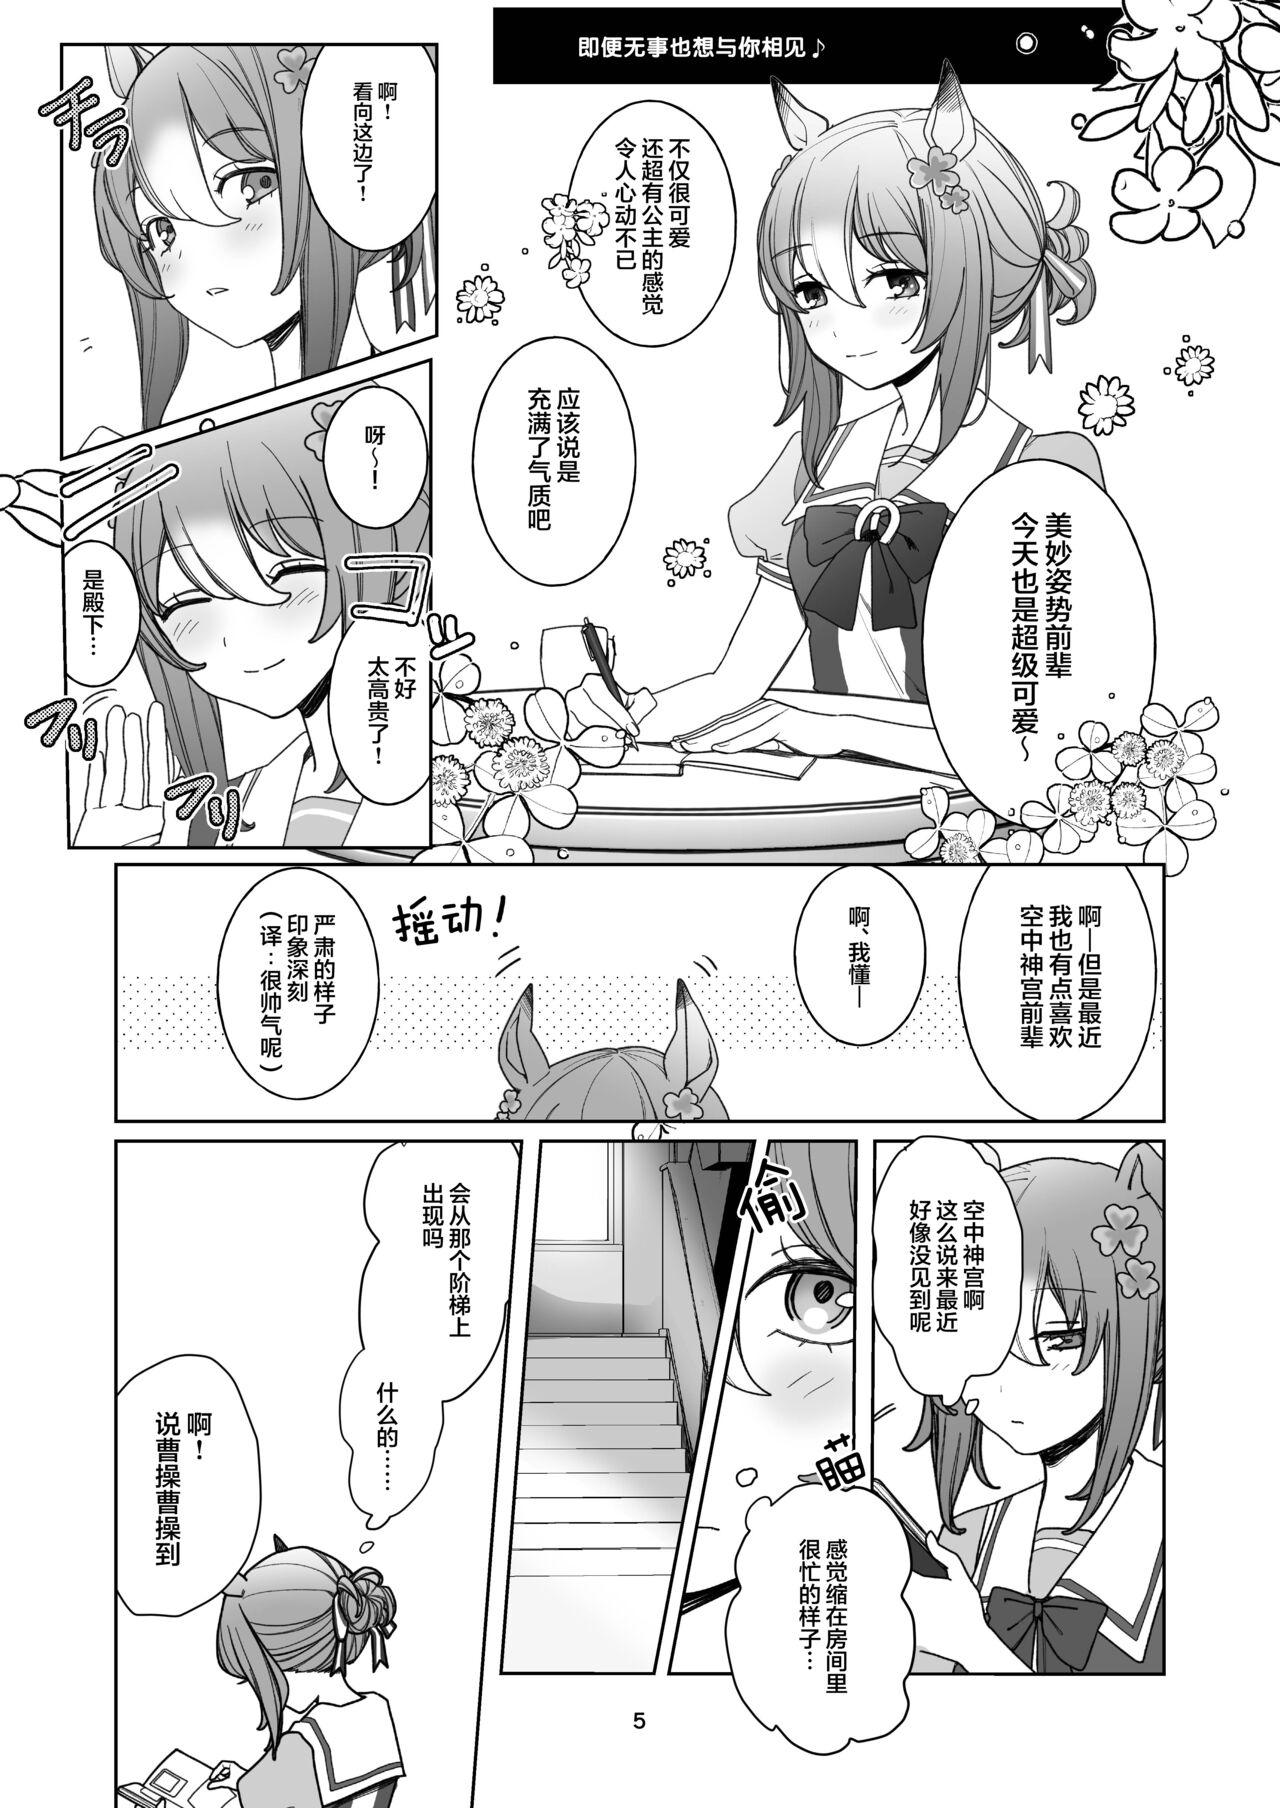 Love OUR DIARY - Uma musume pretty derby Money - Page 2